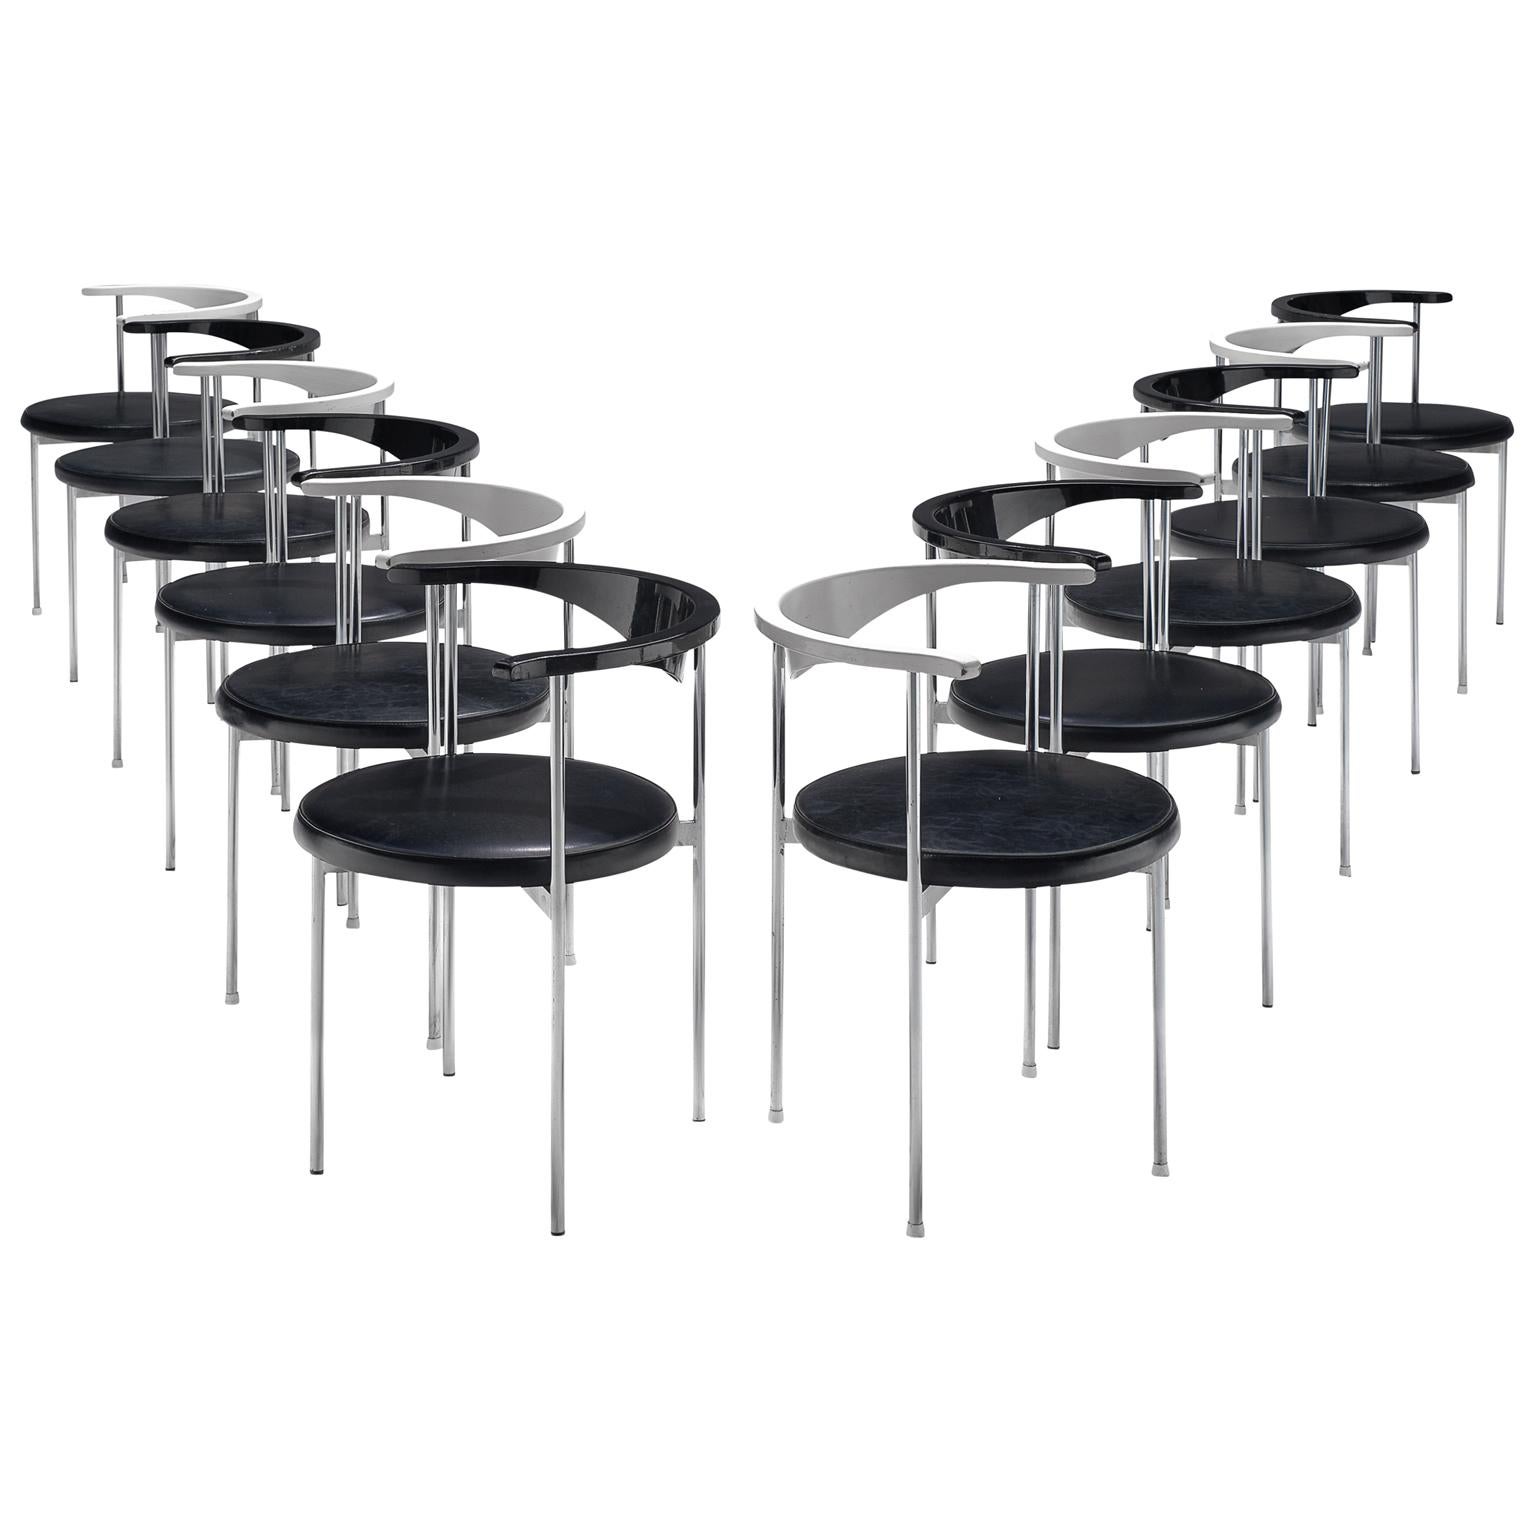 Frederik Sieck of Twelve Chairs in Black and White